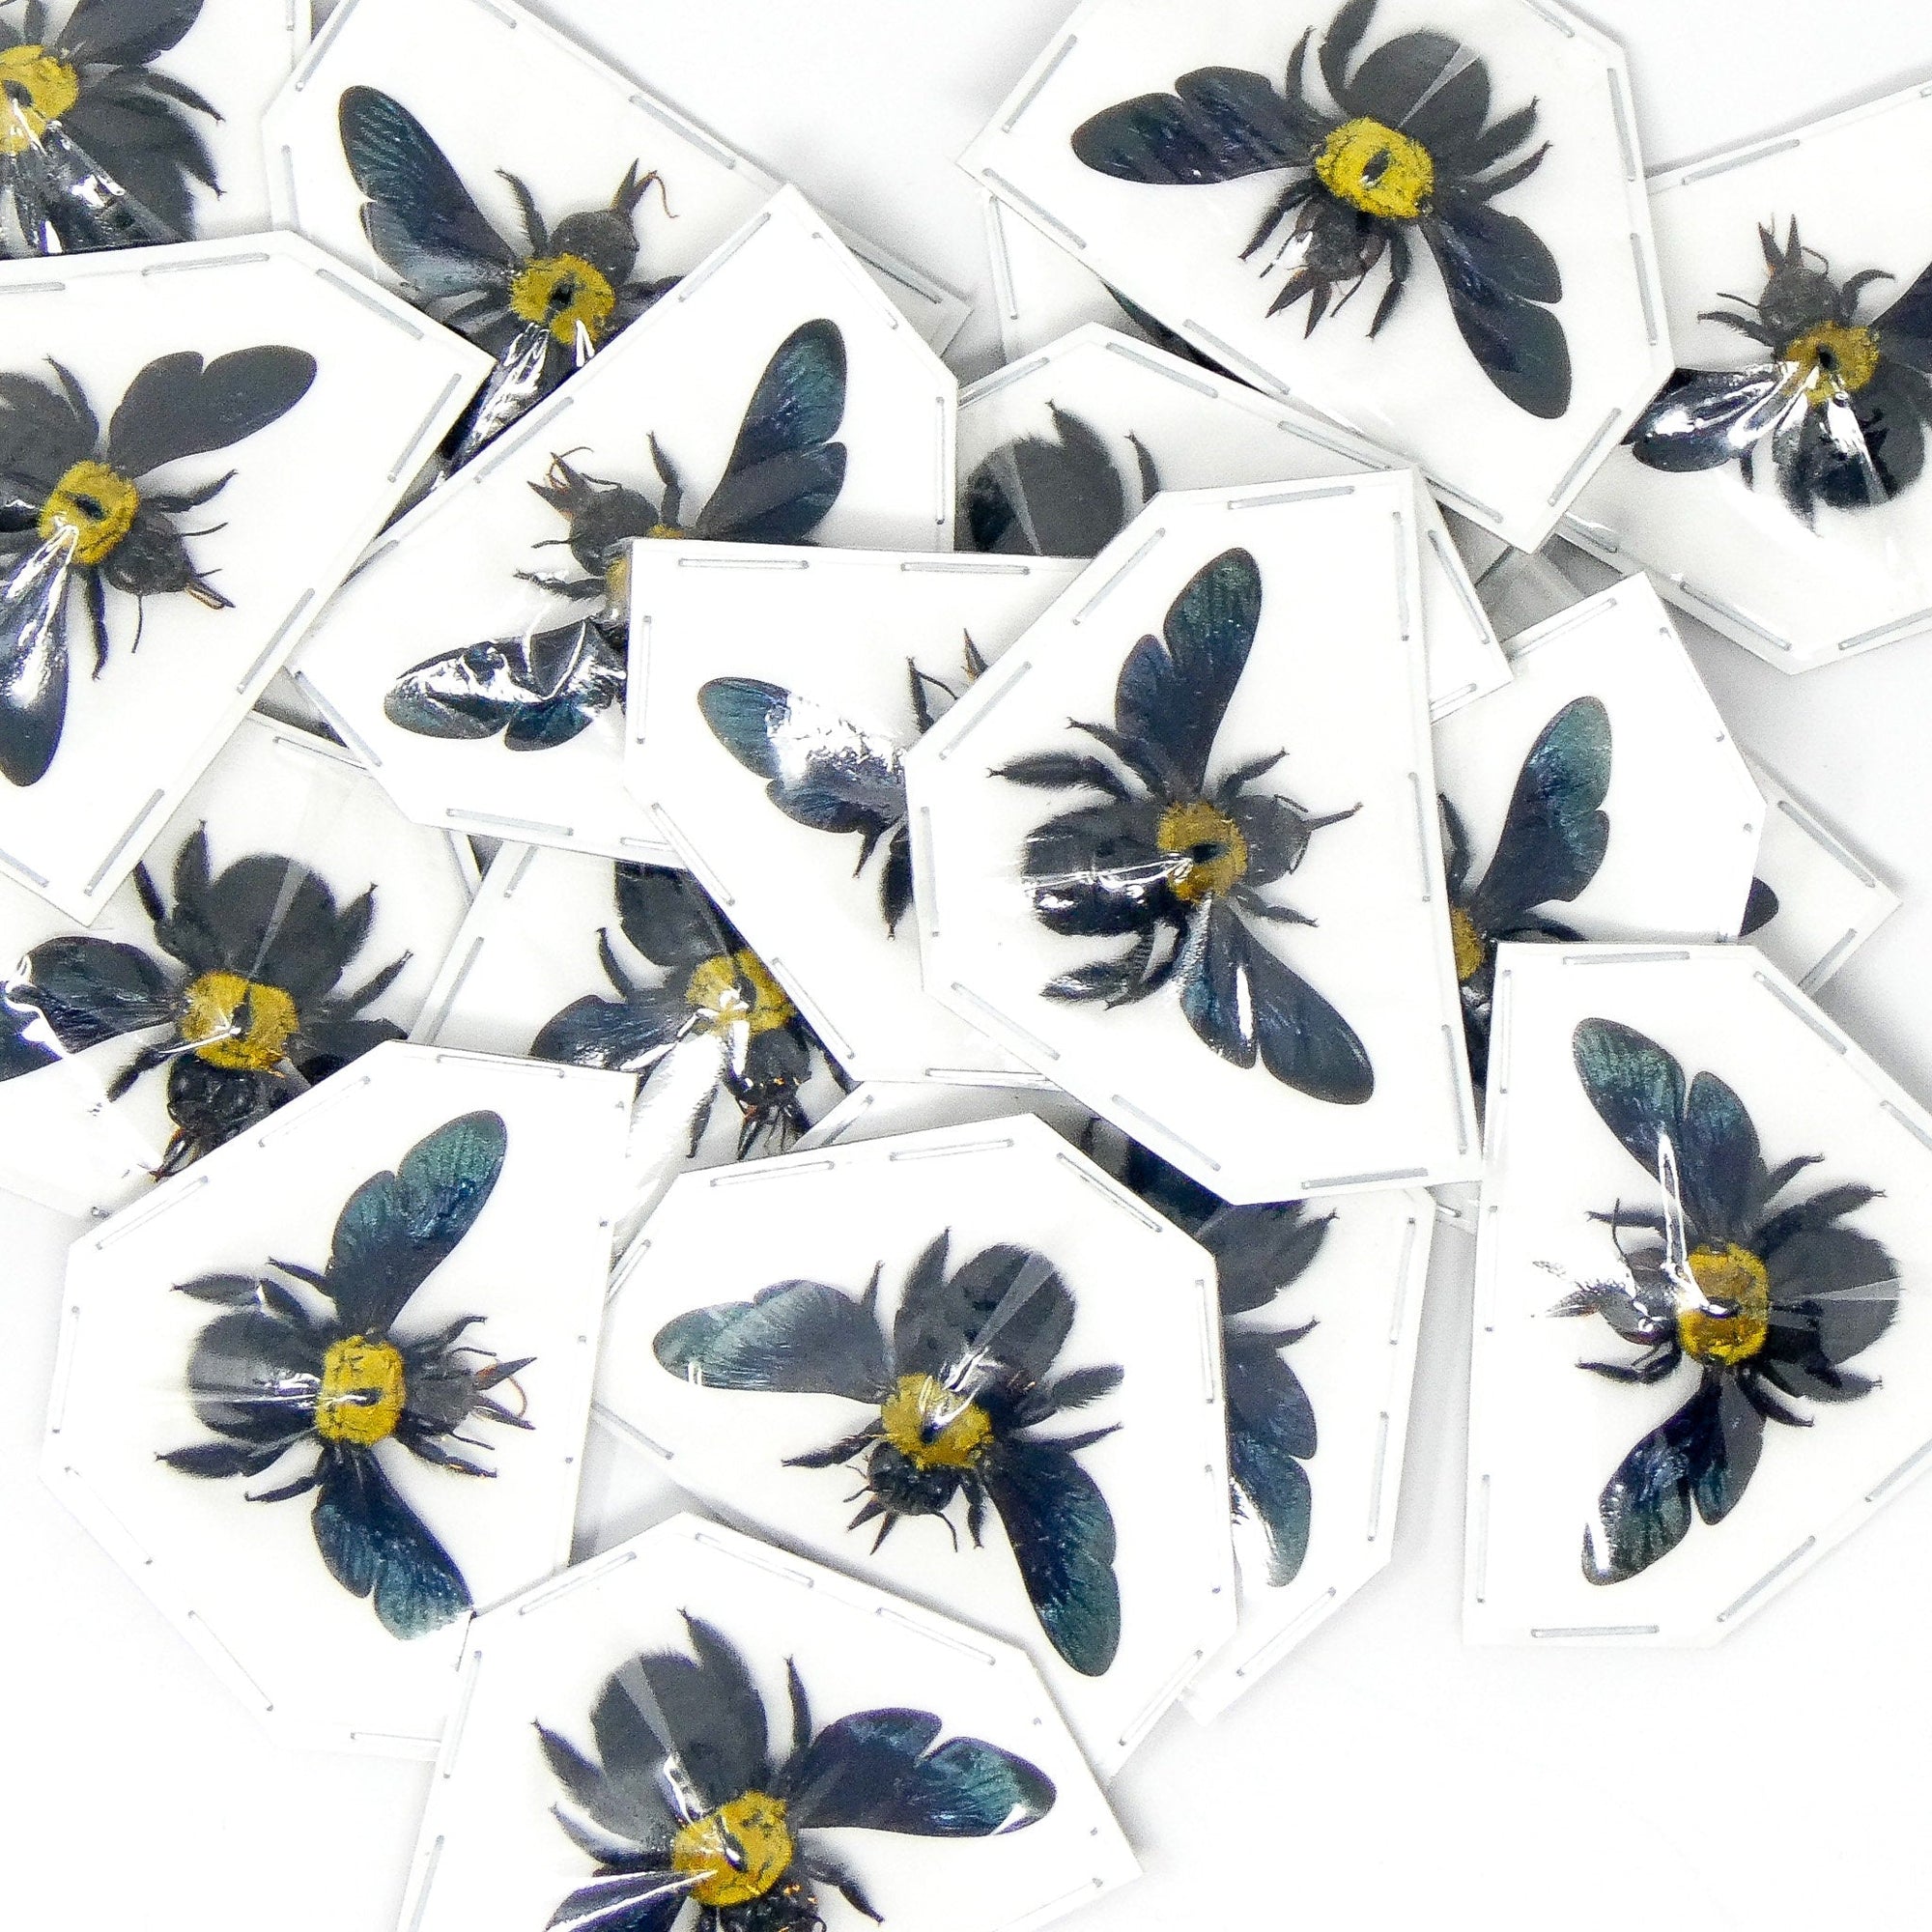 Pack of 25 Yellow Carpenter Bees (Xylocopa aestuans) | A1 Spread Specimens